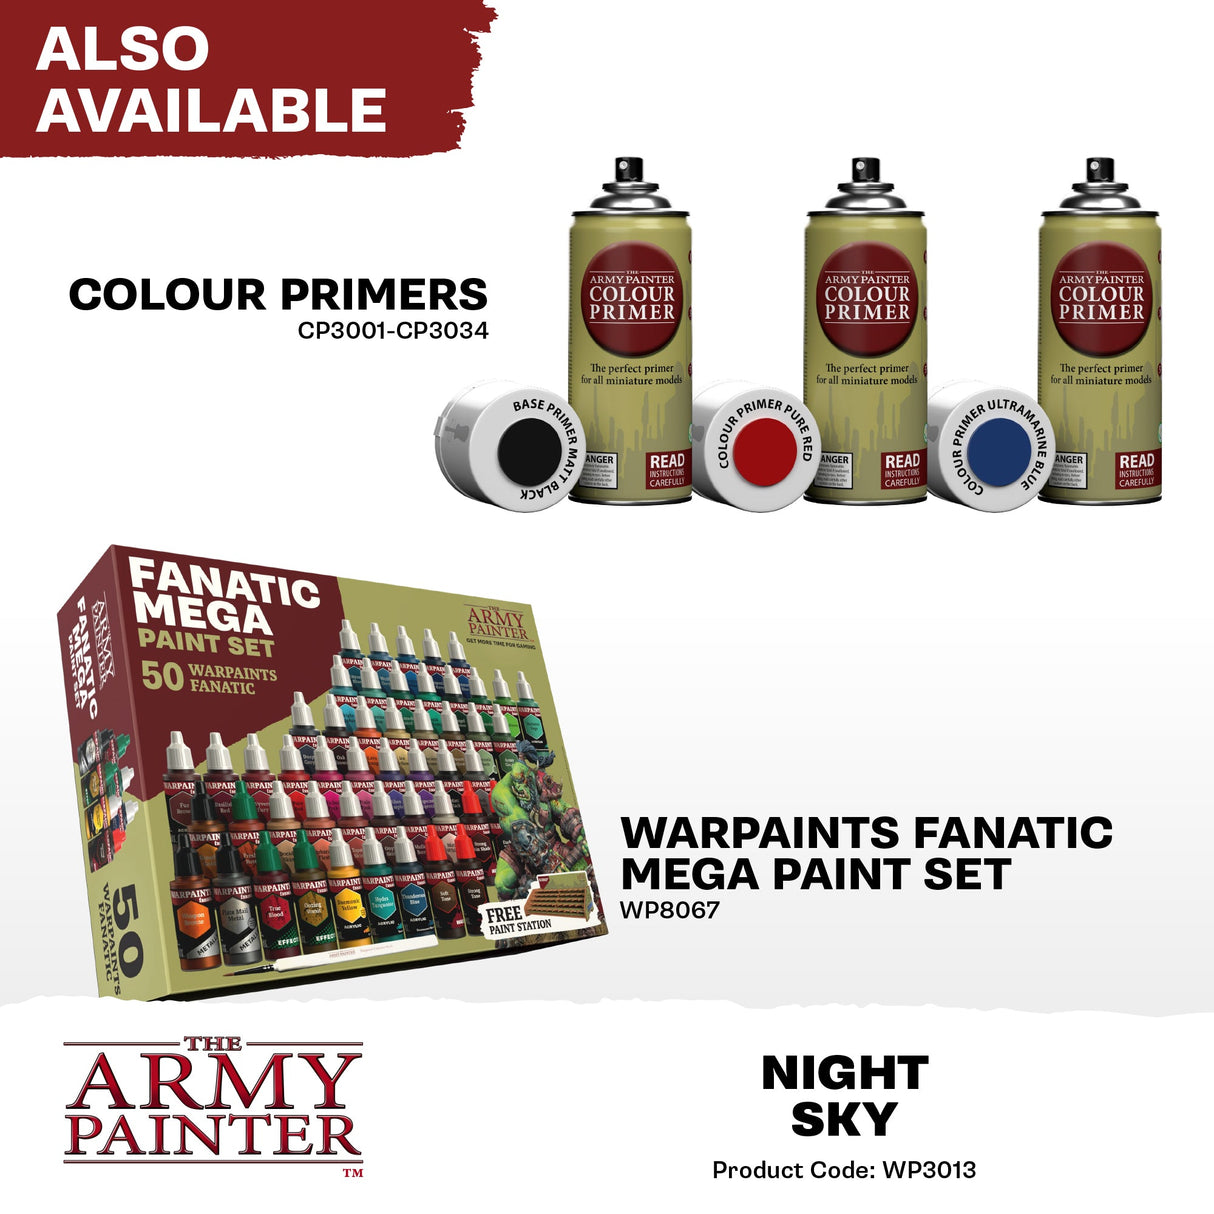 The Army Painter - Warpaints Fanatic: Night Sky